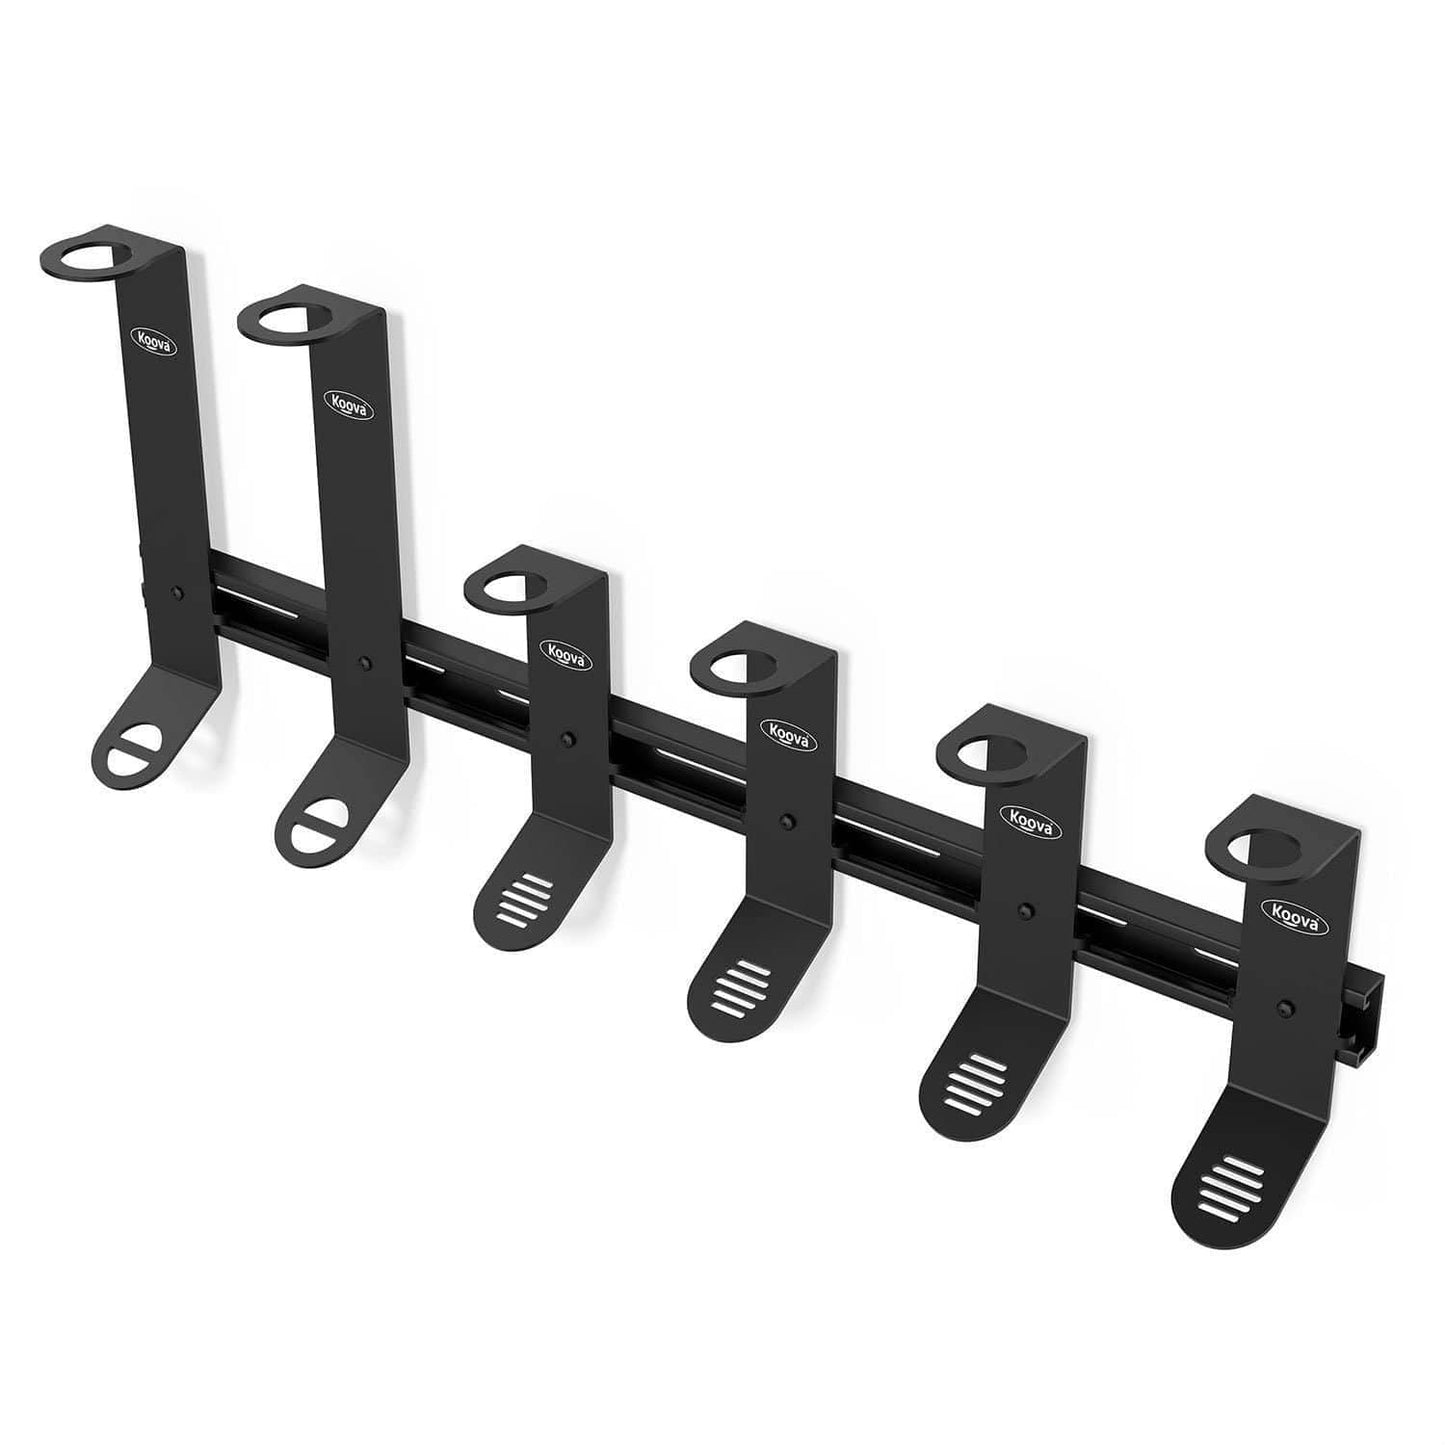 Spinning and Offshore Fishing Rod Rack Organizer